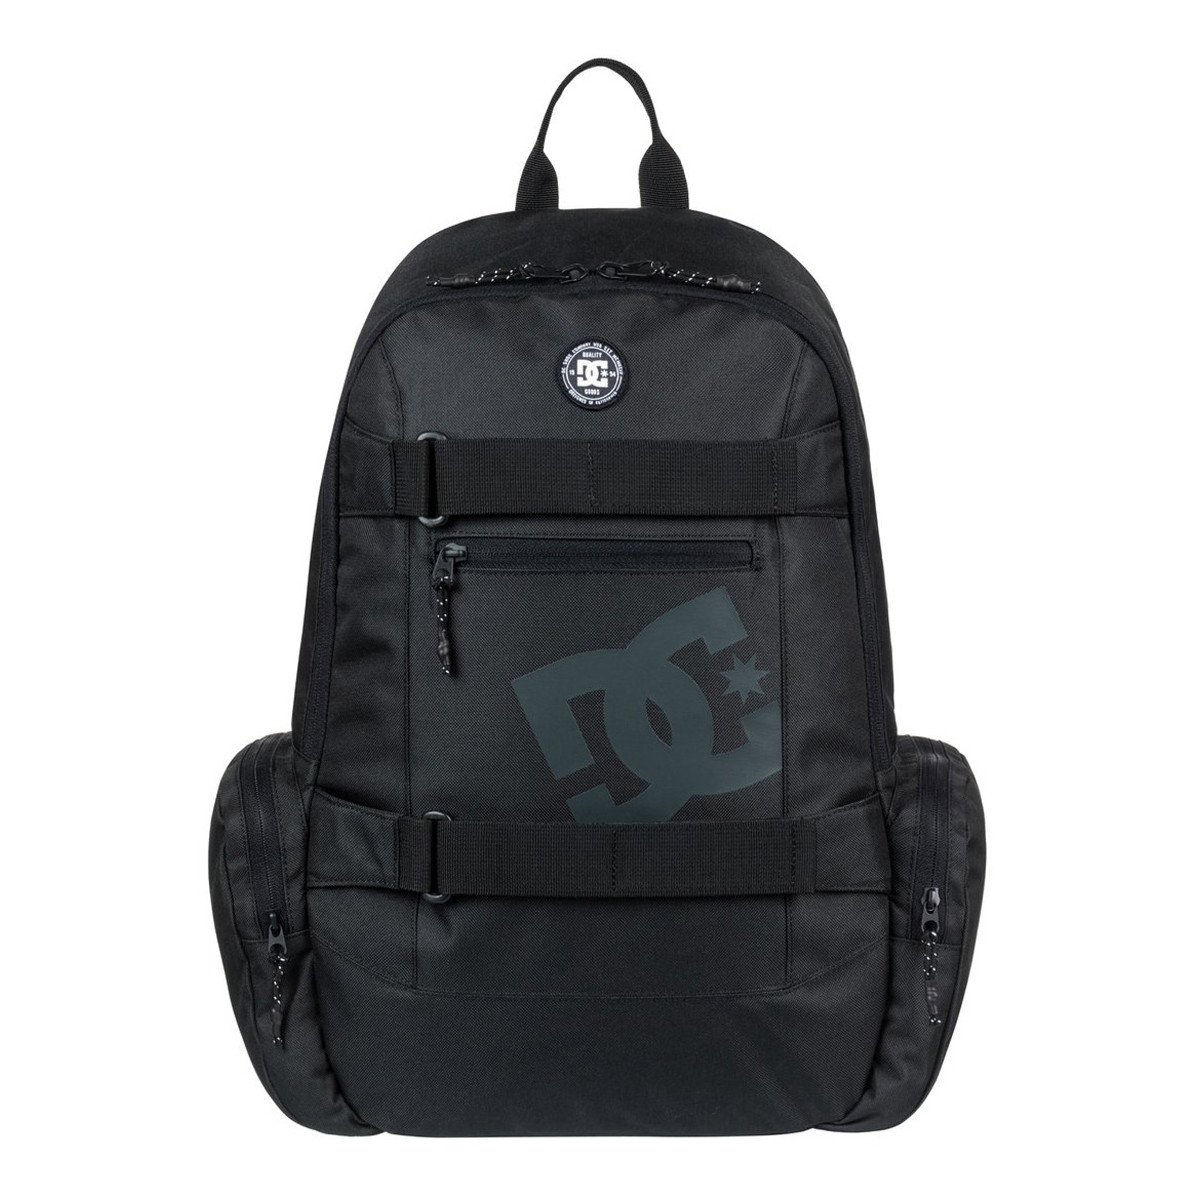 DC Backpack The Breed Black